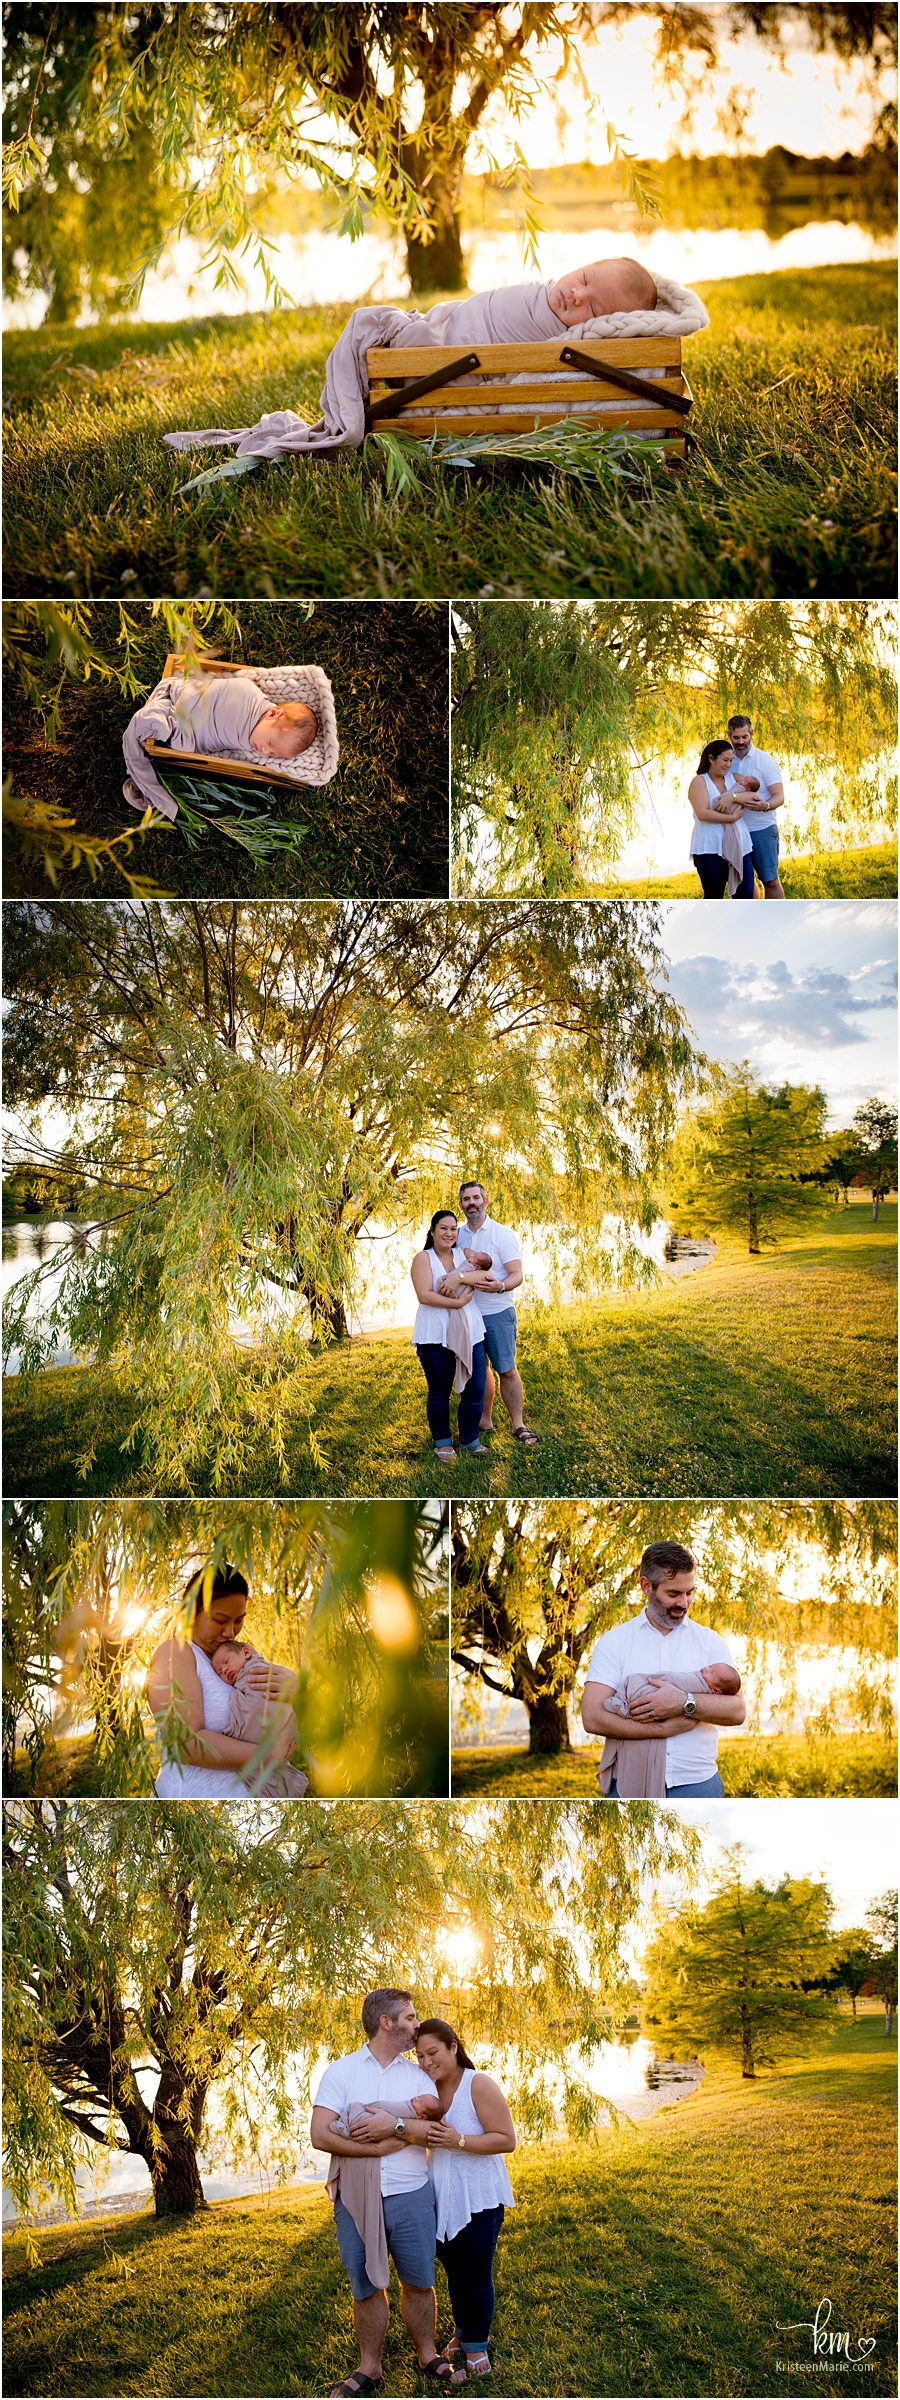 outdoor newborn photography - newborn and family - sunset images